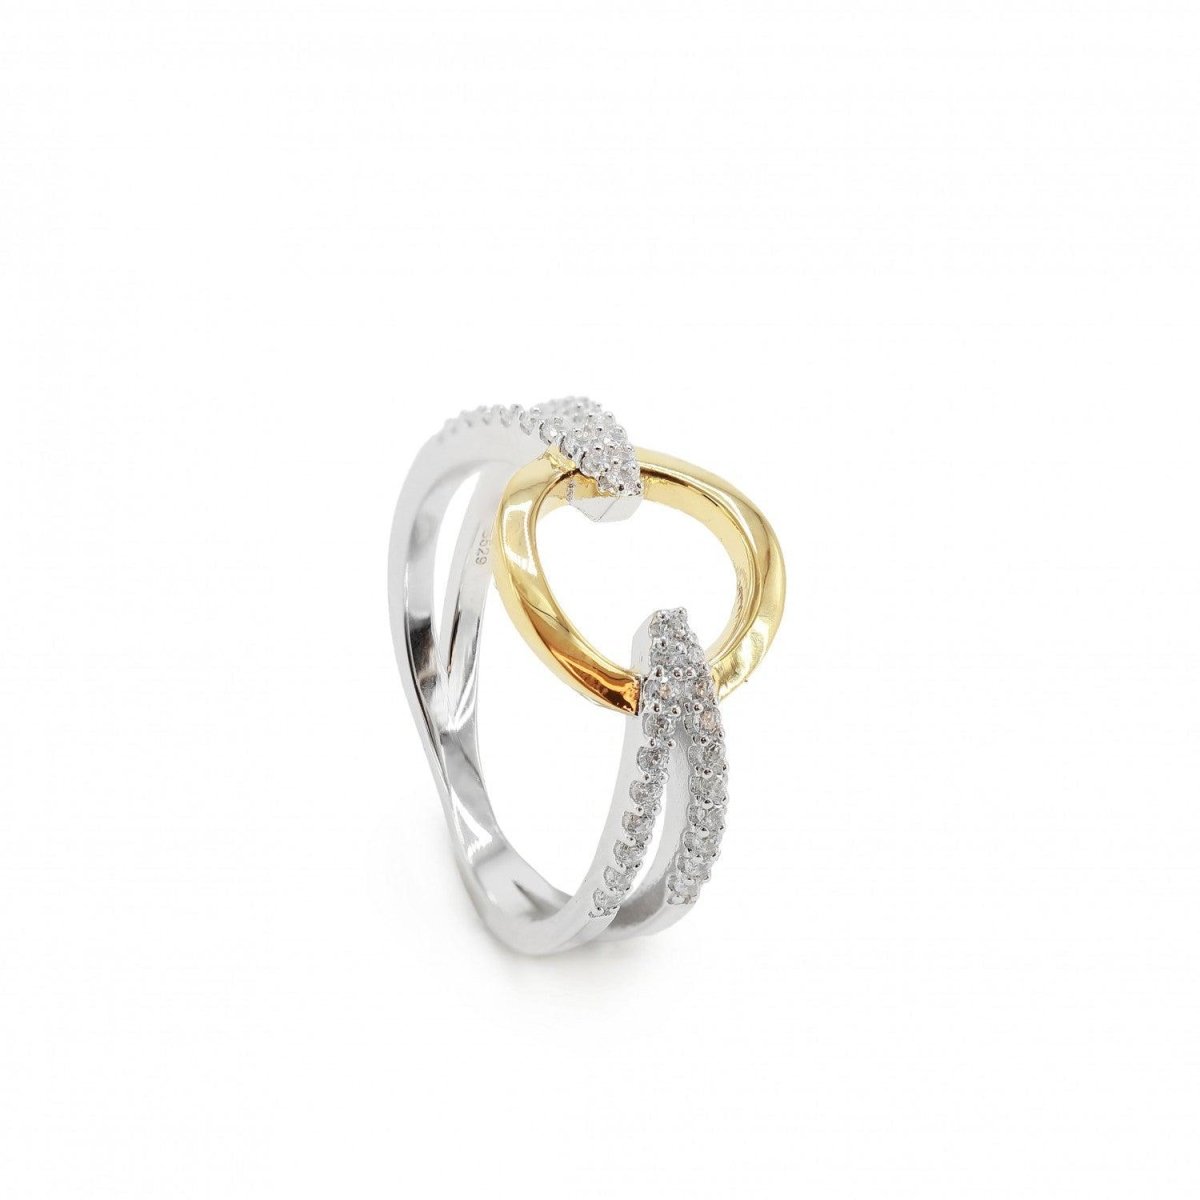 Ring - Bicolor rings circular design with zirconia on the sides